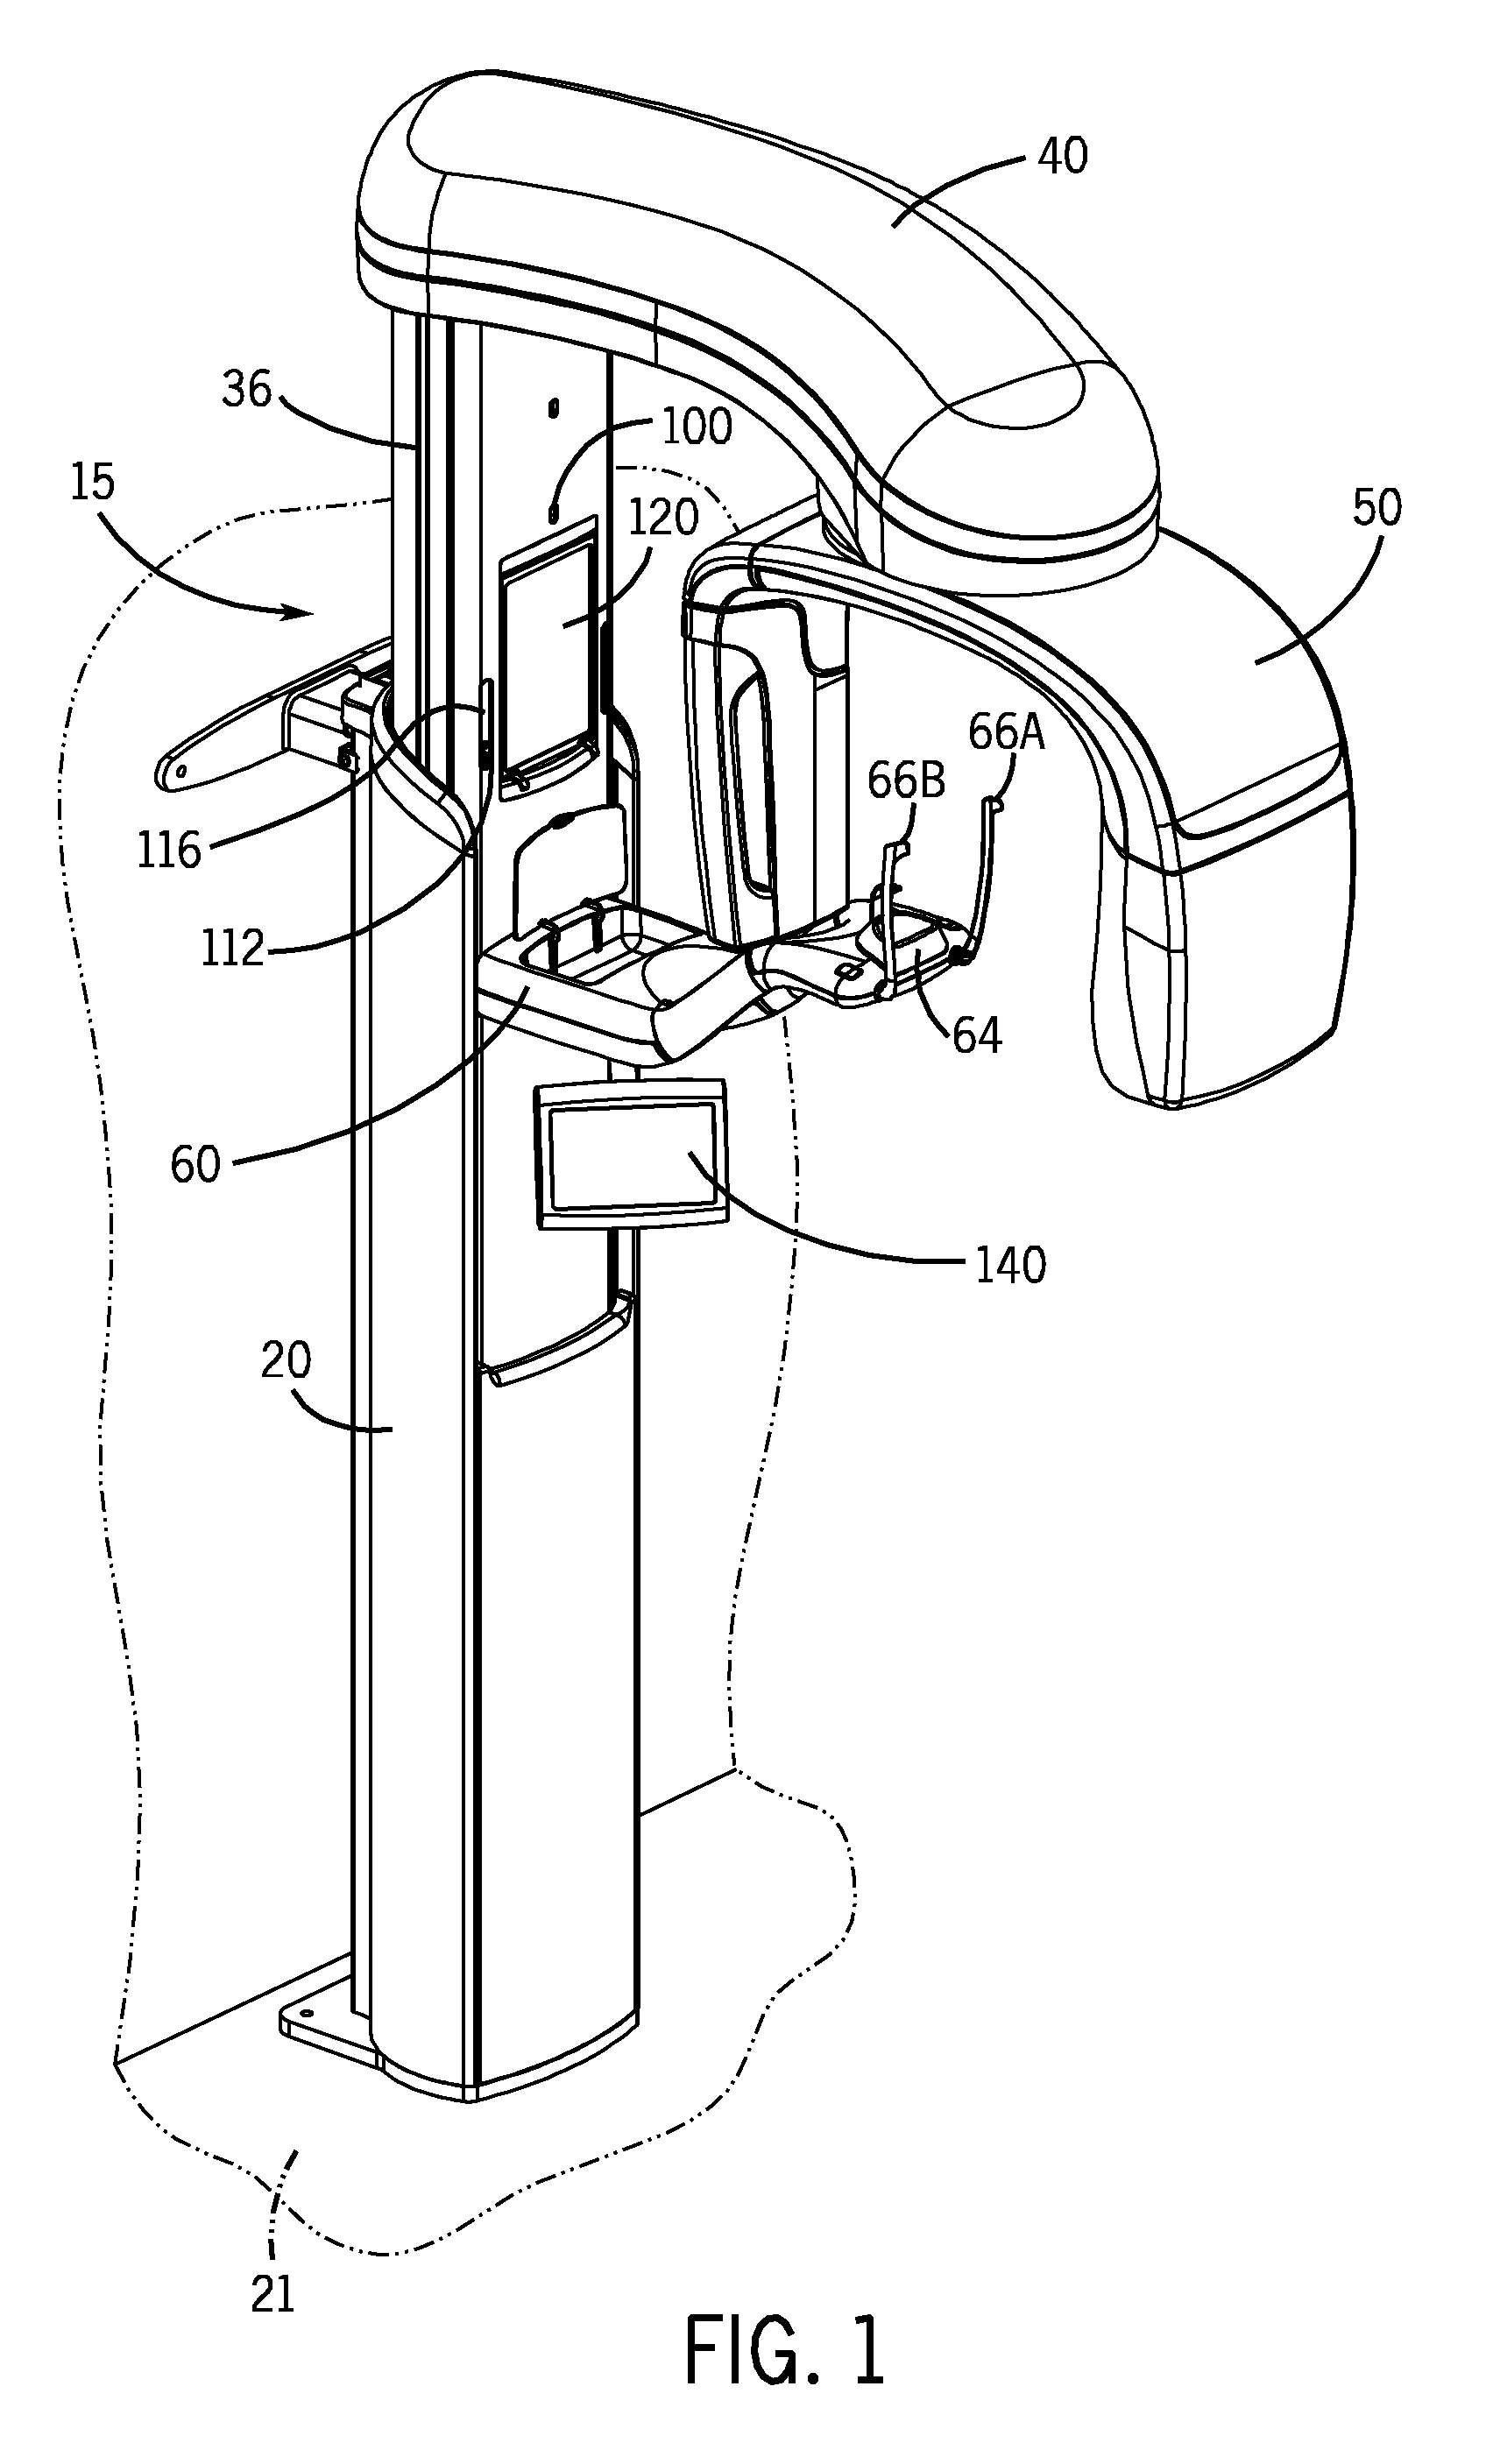 Patient positioning system for panoramic dental radiation imaging system